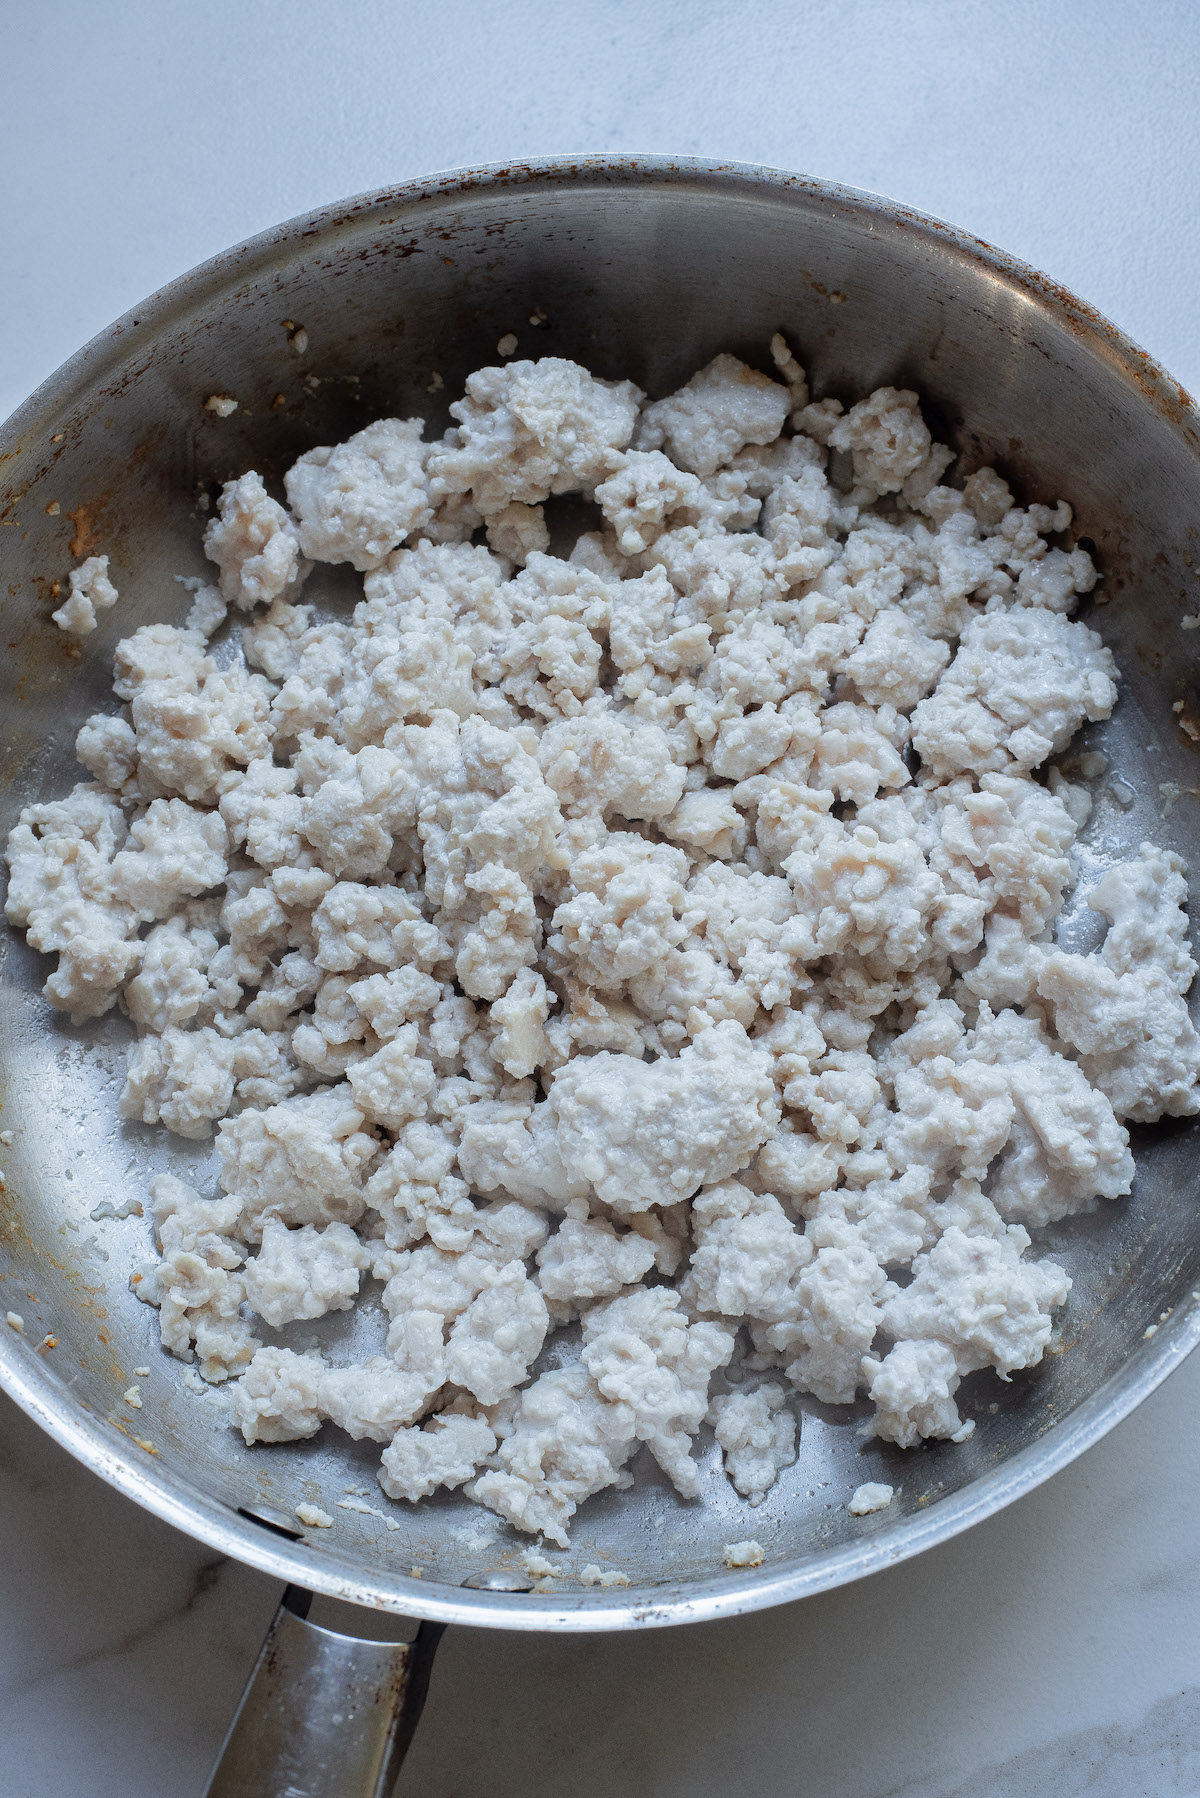 Cook Ground Turkey to What Temp? Safe Cooking Guidelines